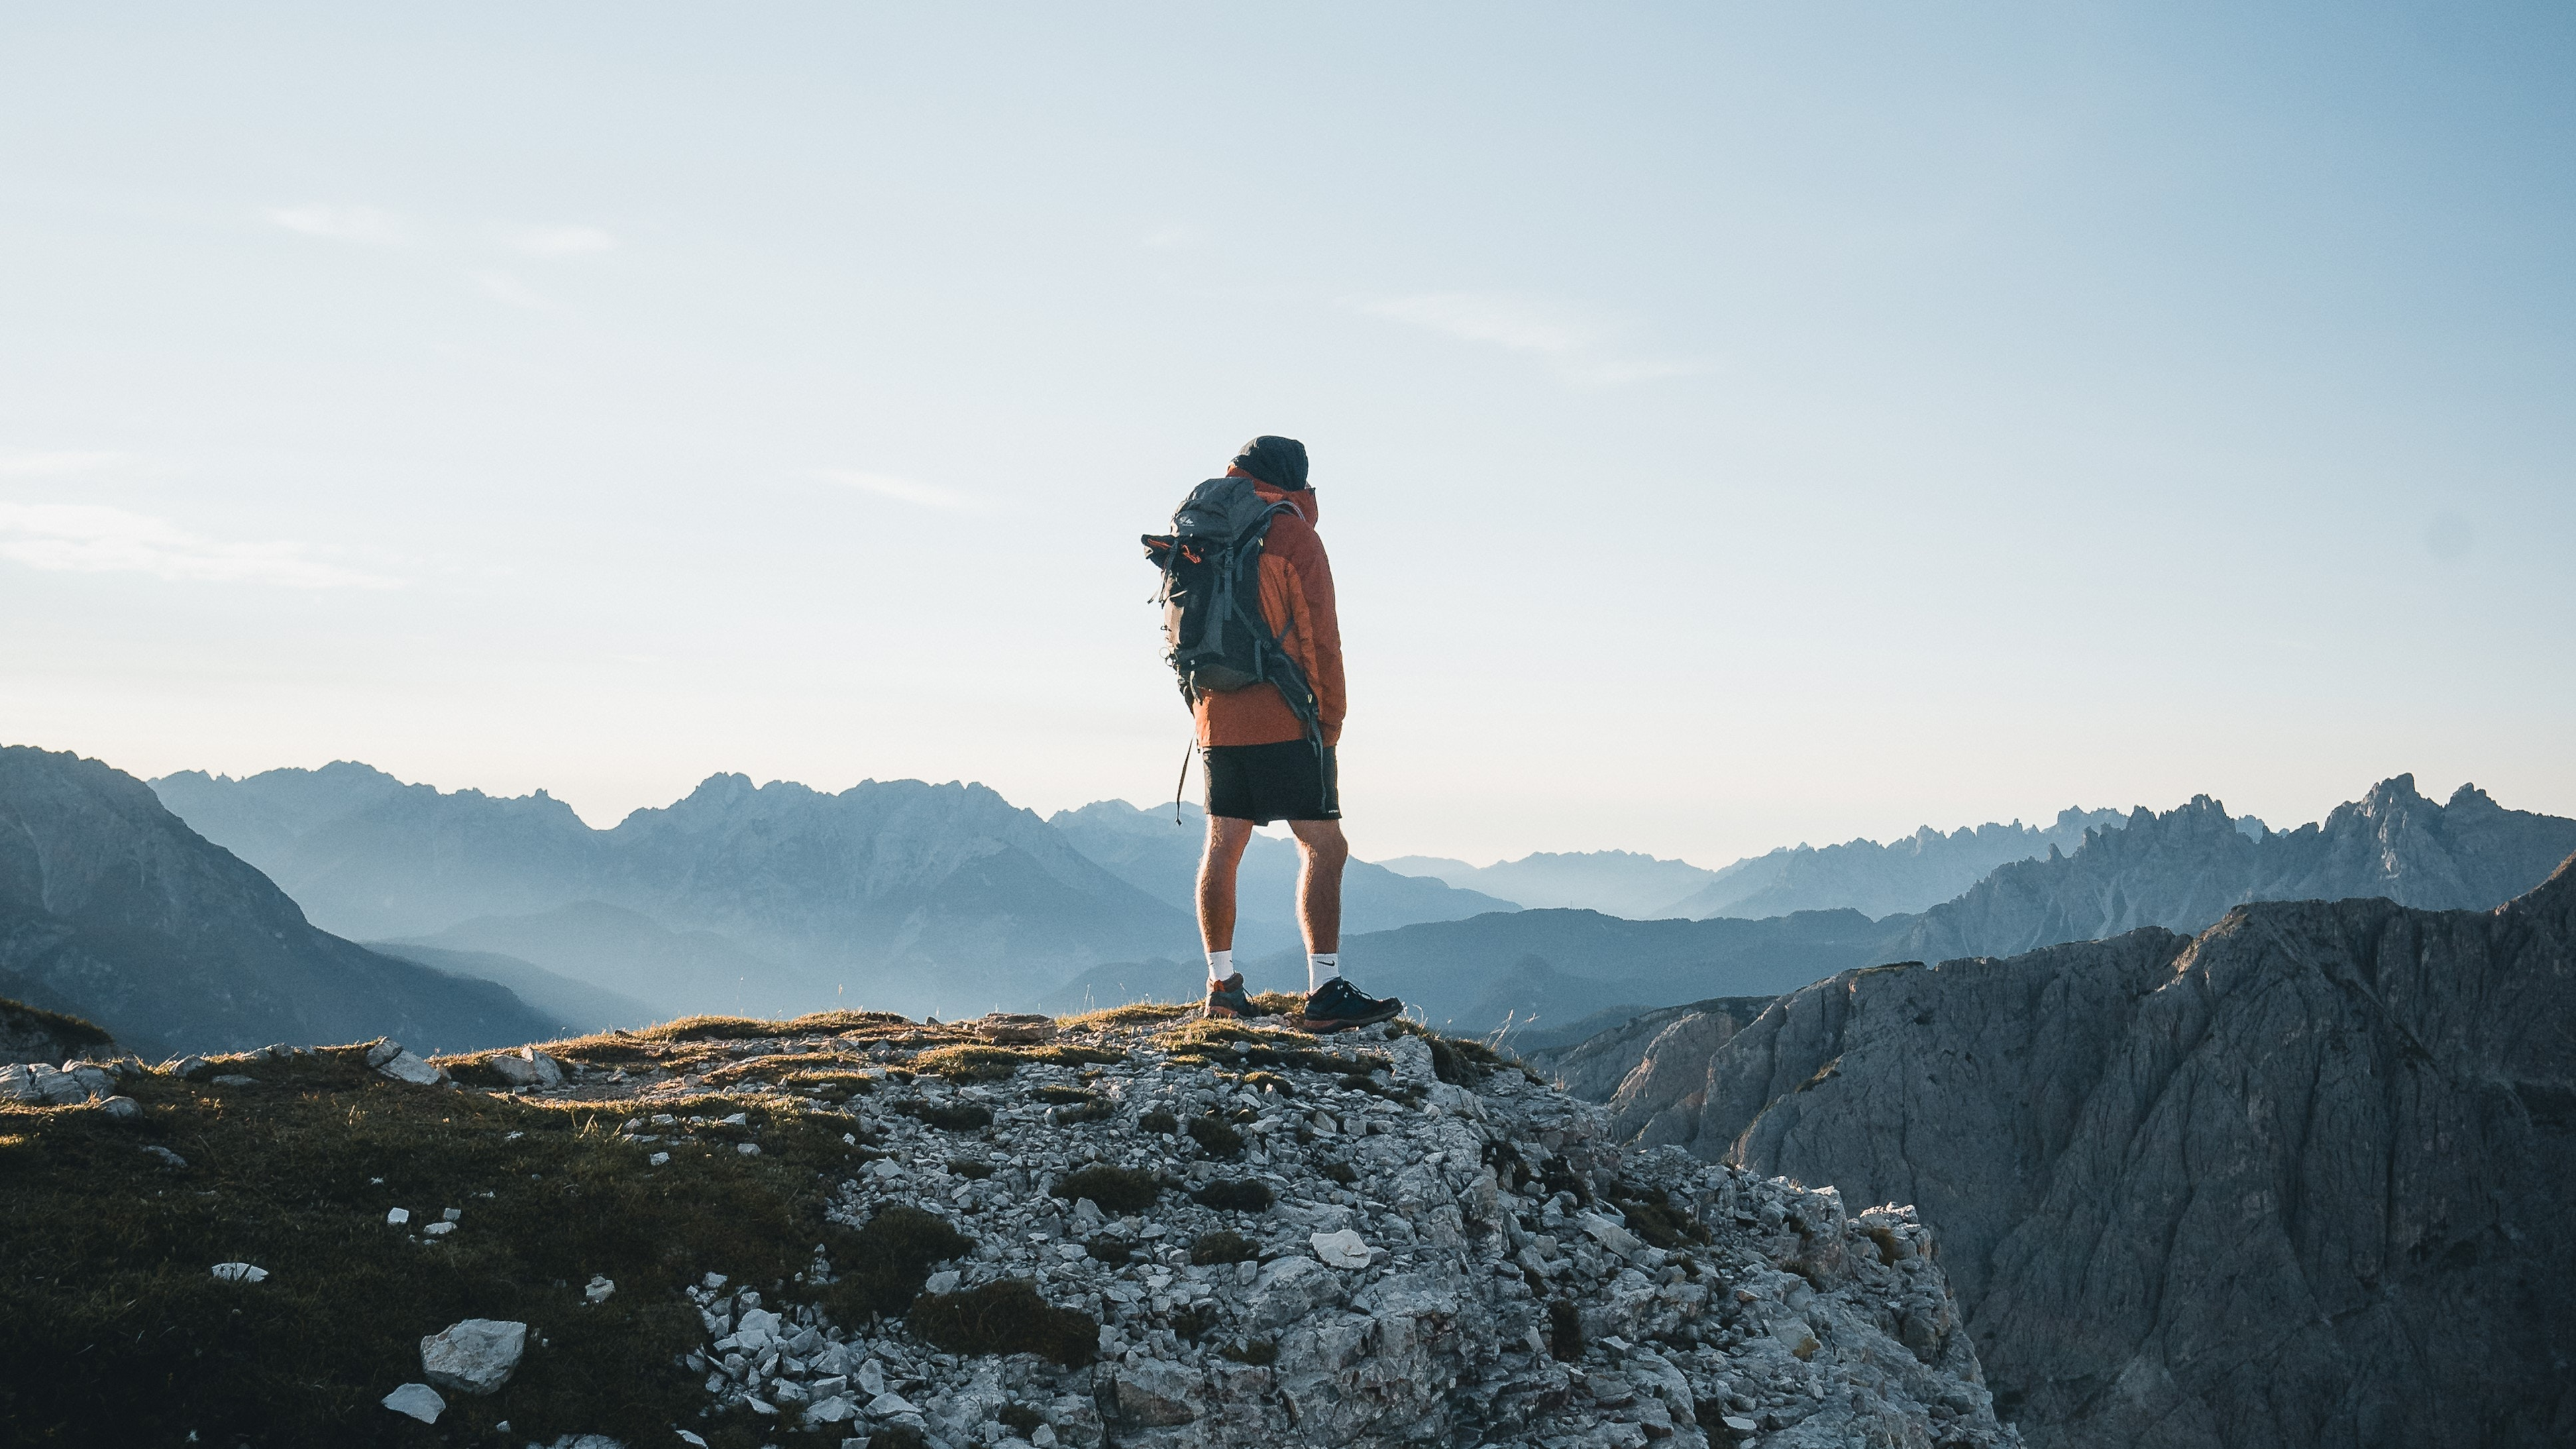 Hiking is perfect for those who want adventure and recreation together | Photo by Stann Swinnen from Pexels